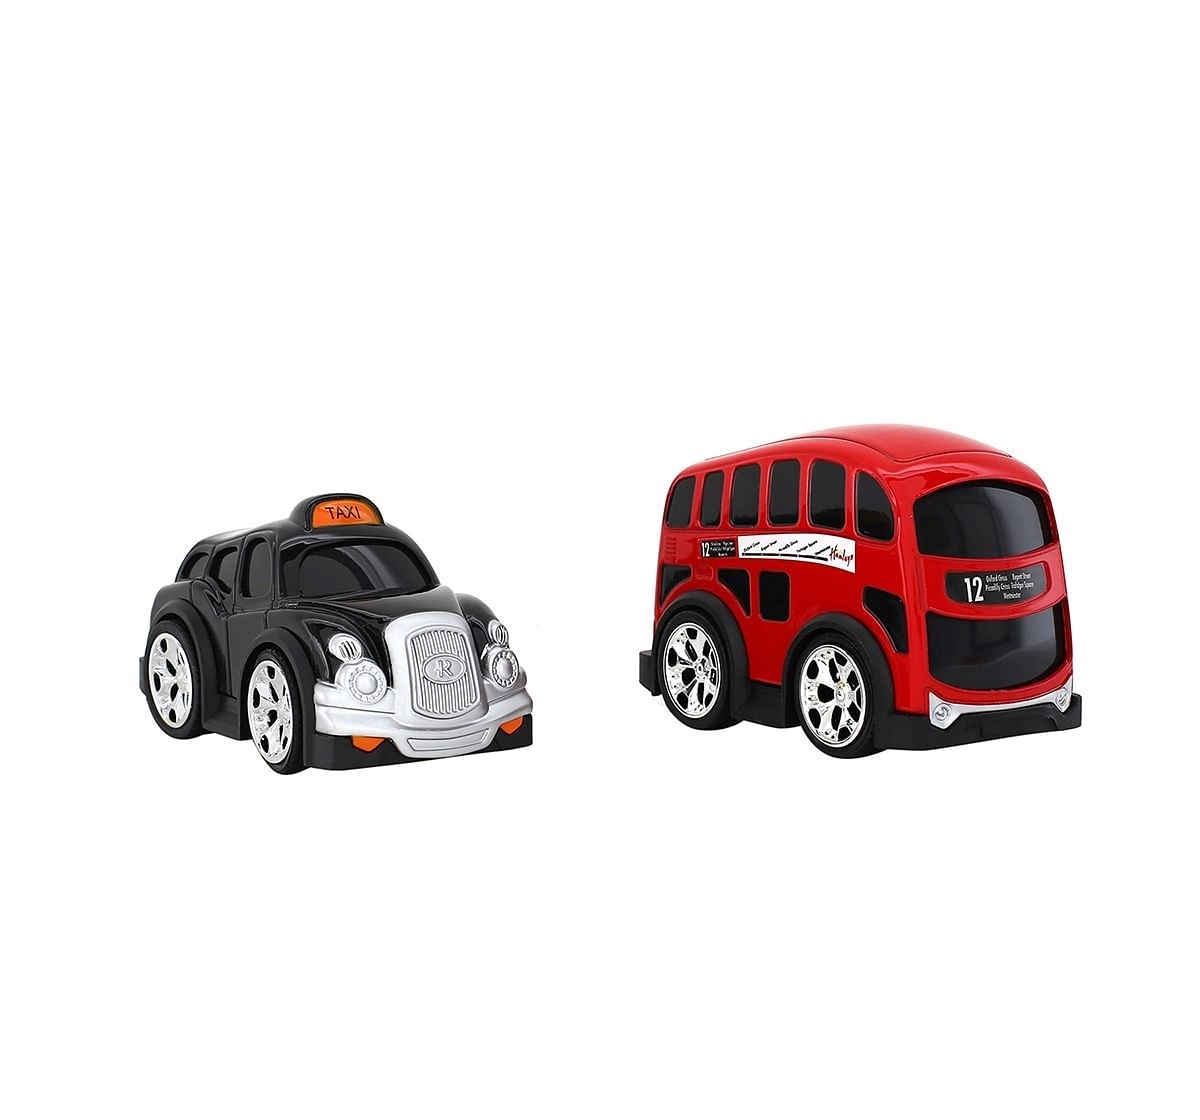  Hamleys London Bus And Taxi Playset (Red) Vehicles for Kids age 3Y+ (Red)